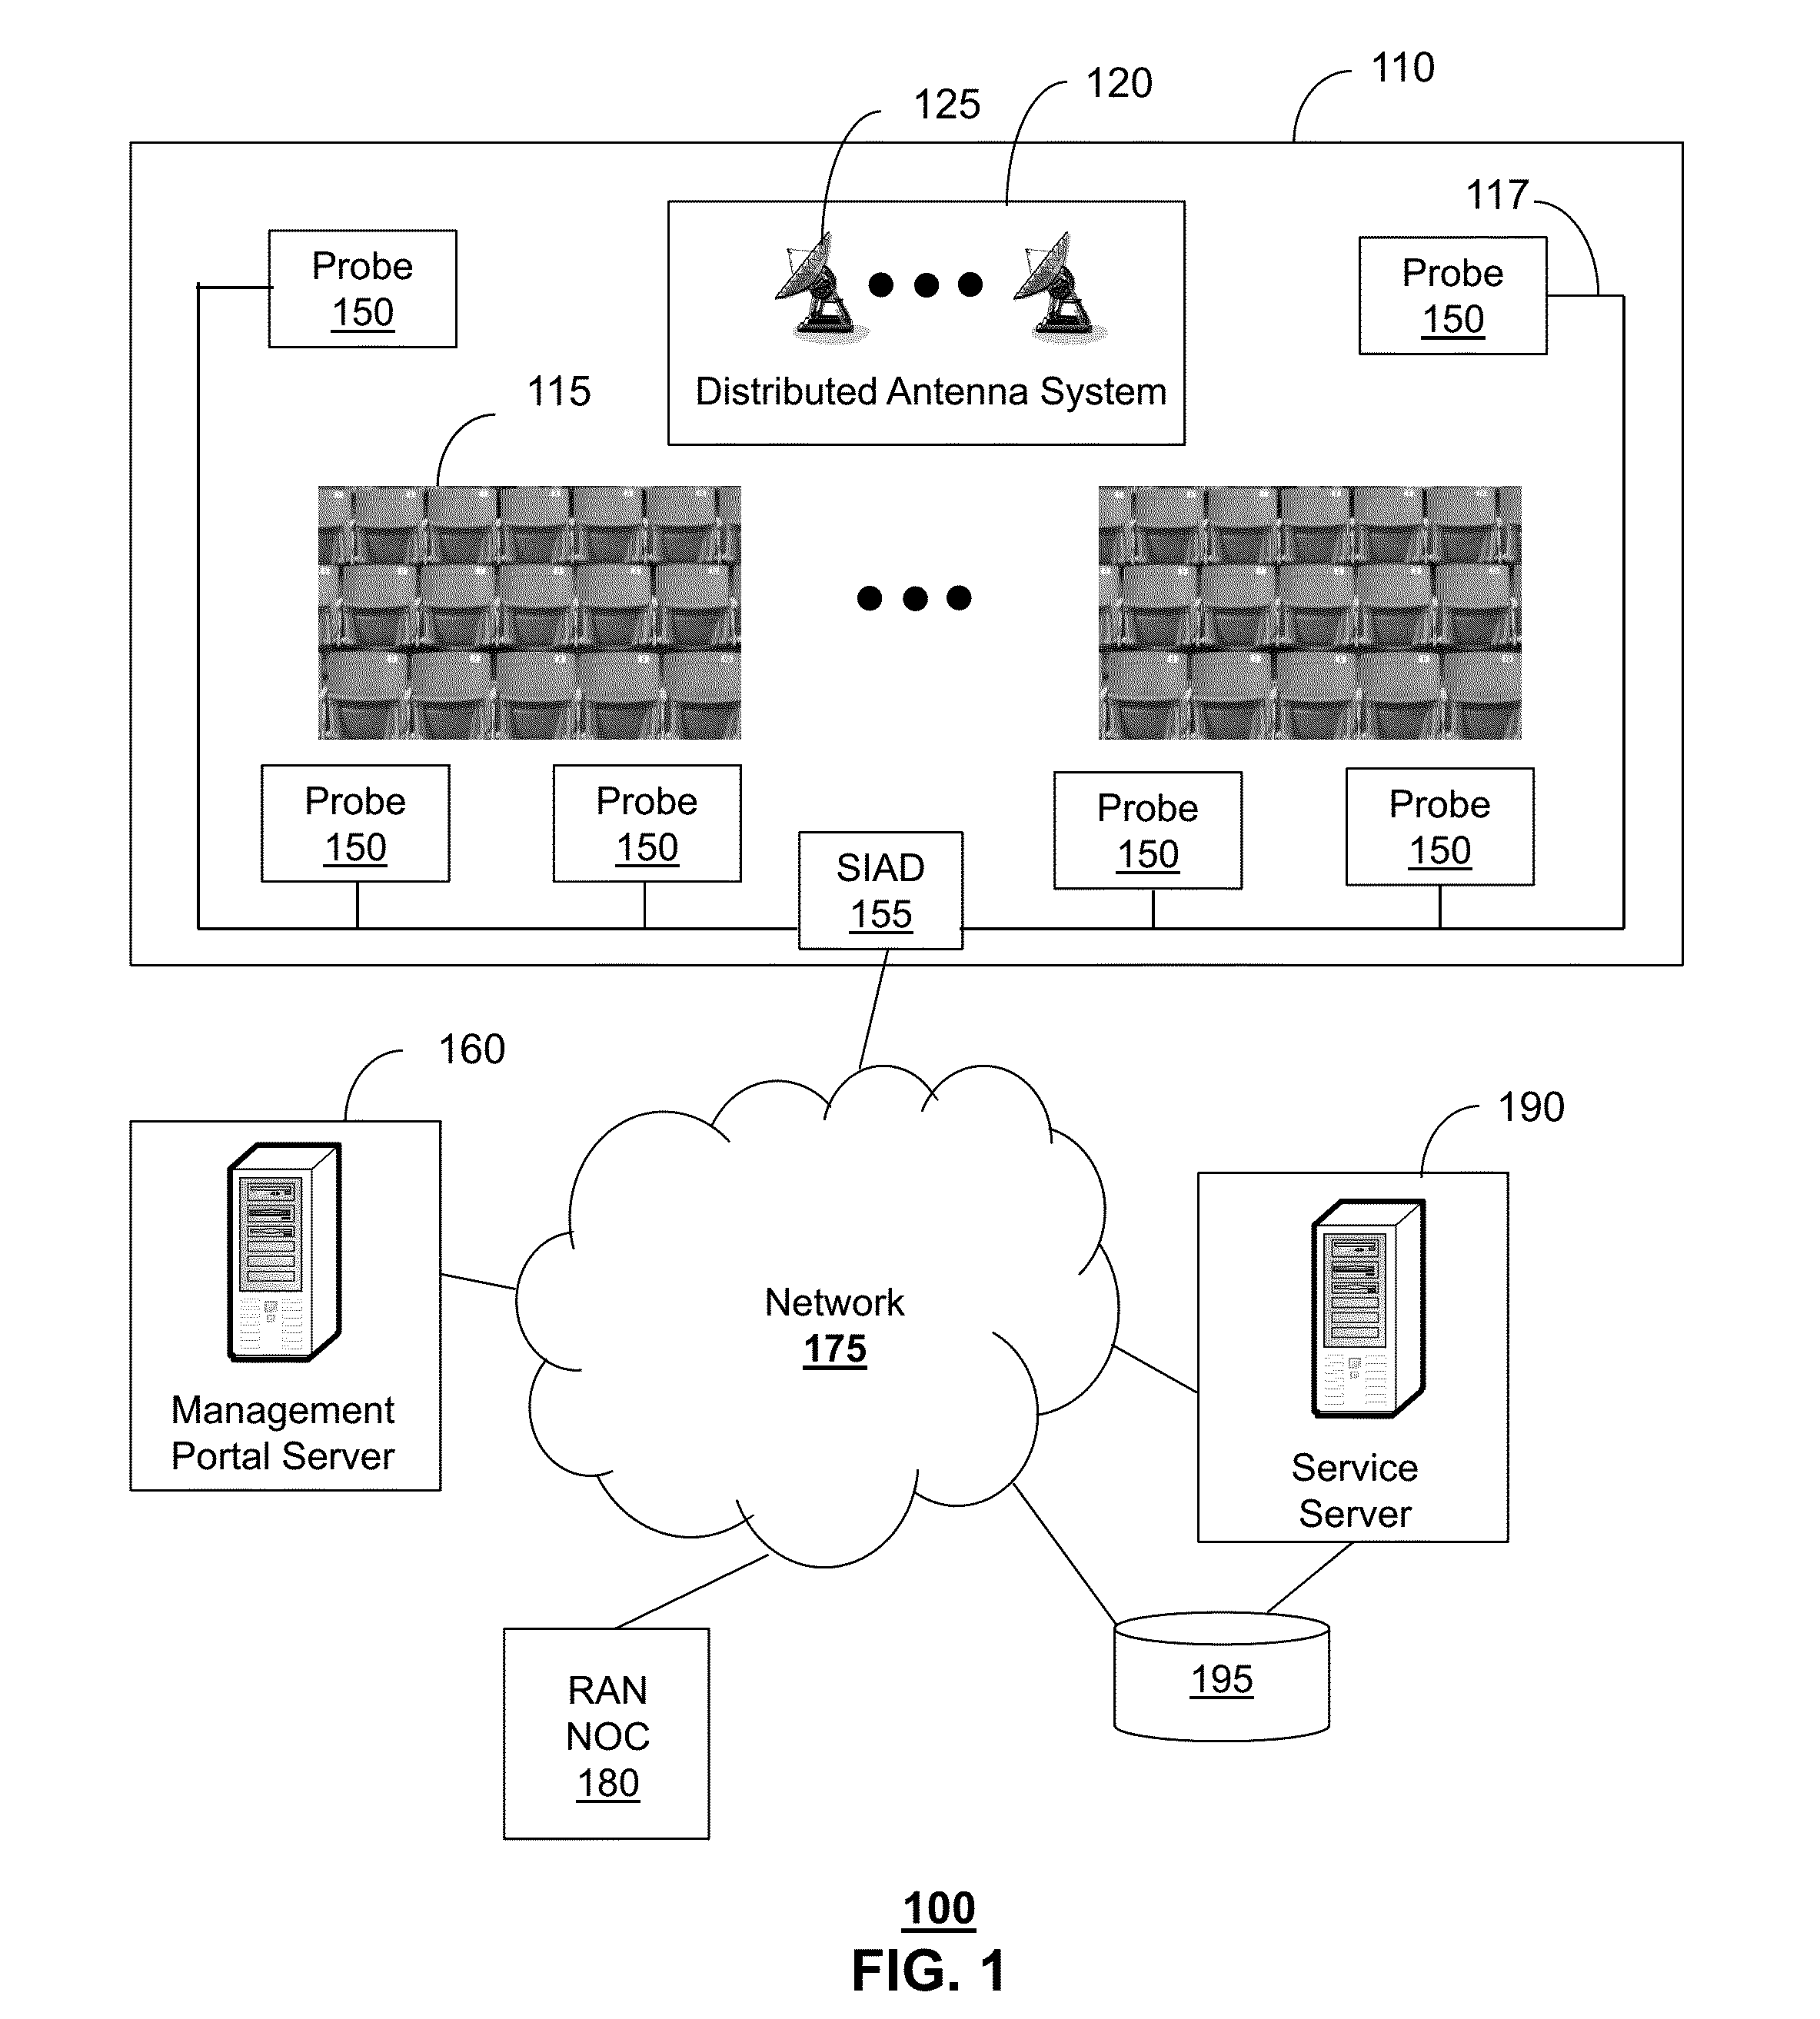 Method and apparatus for monitoring and adjusting multiple communication services at a venue